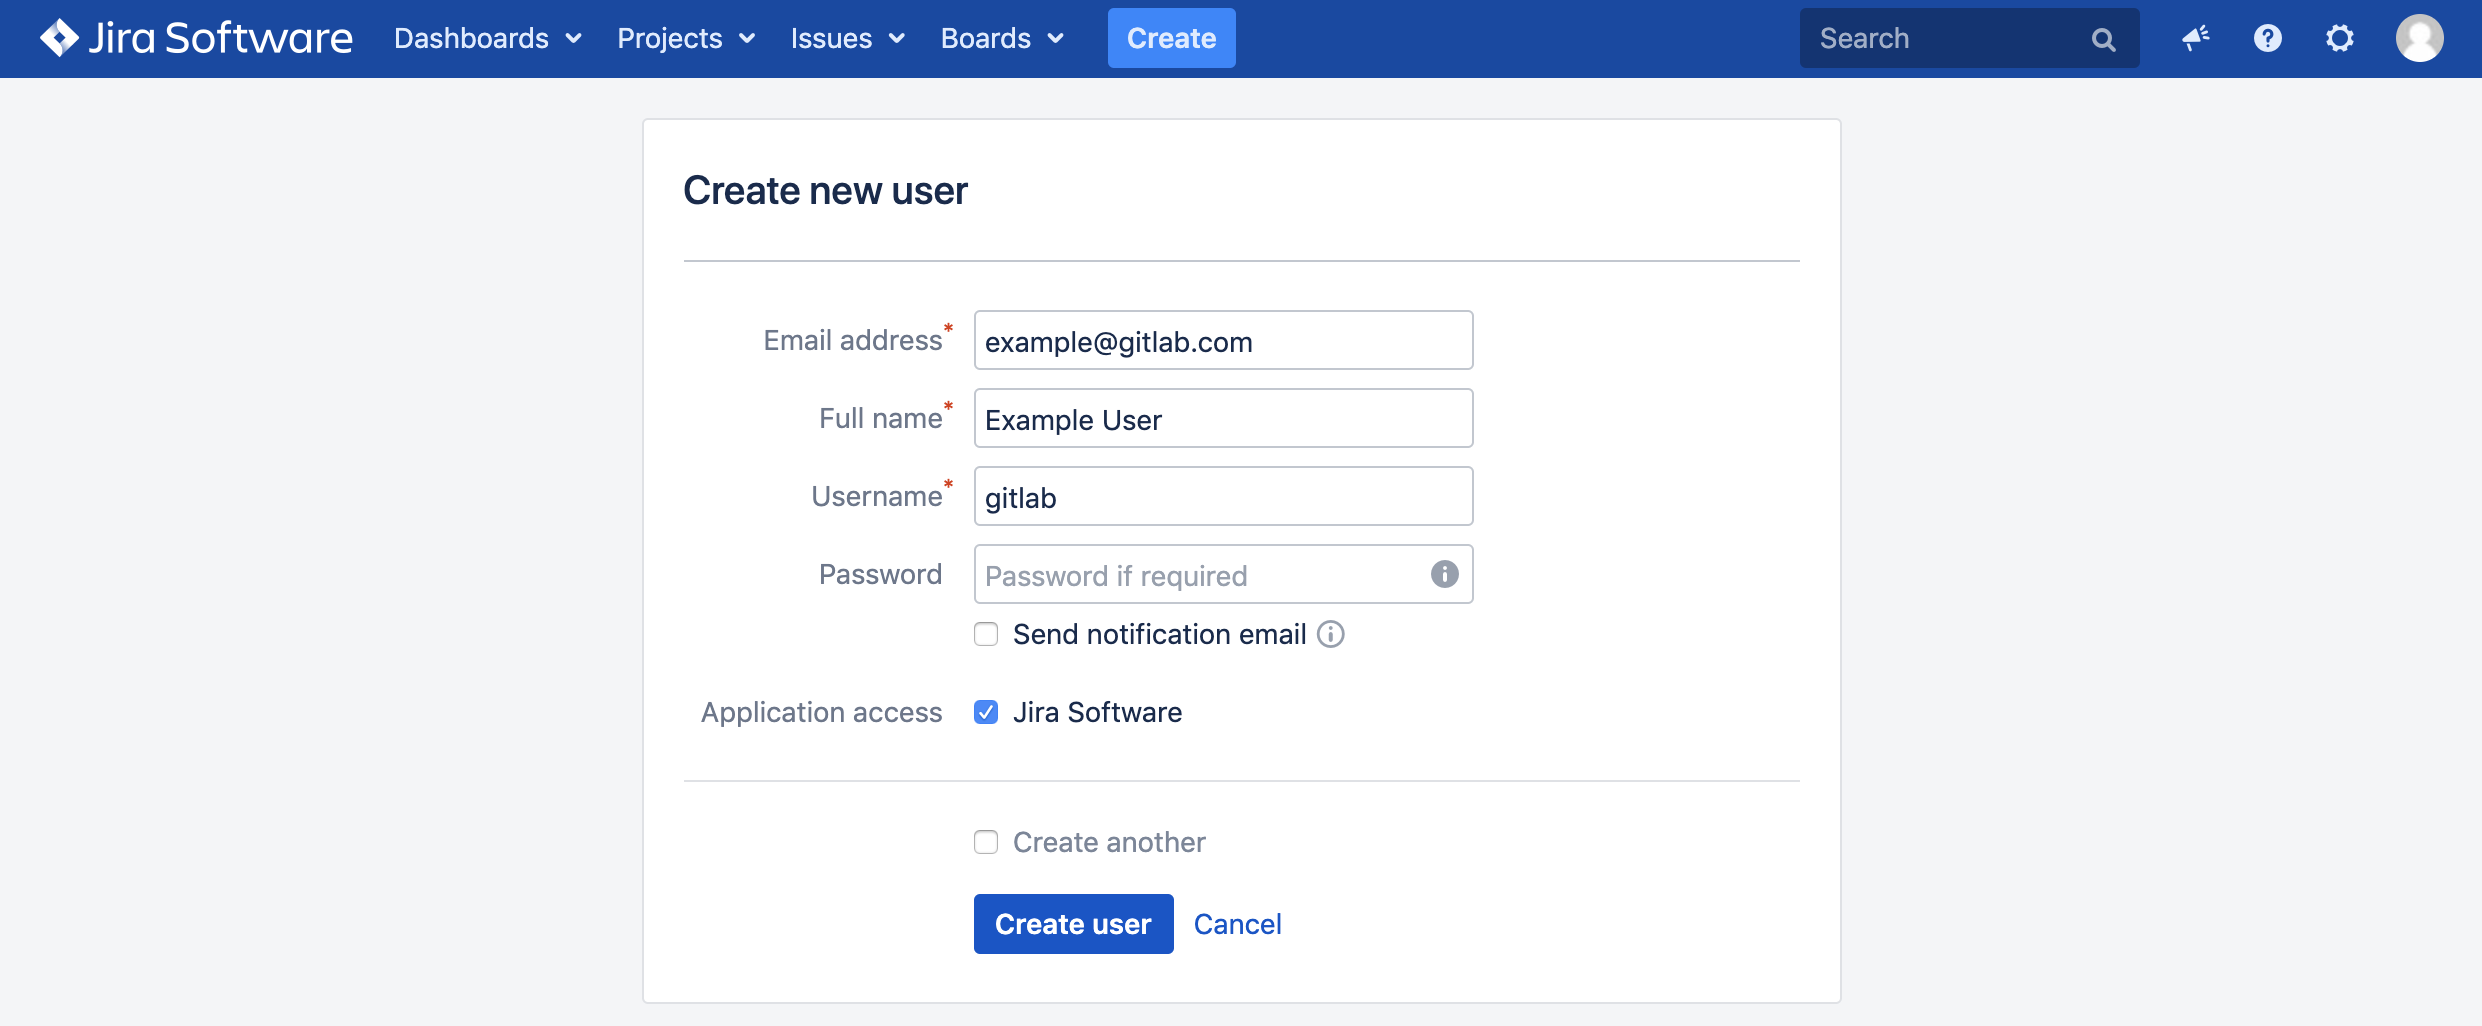 doc/user/project/integrations/img/jira_create_new_user.png